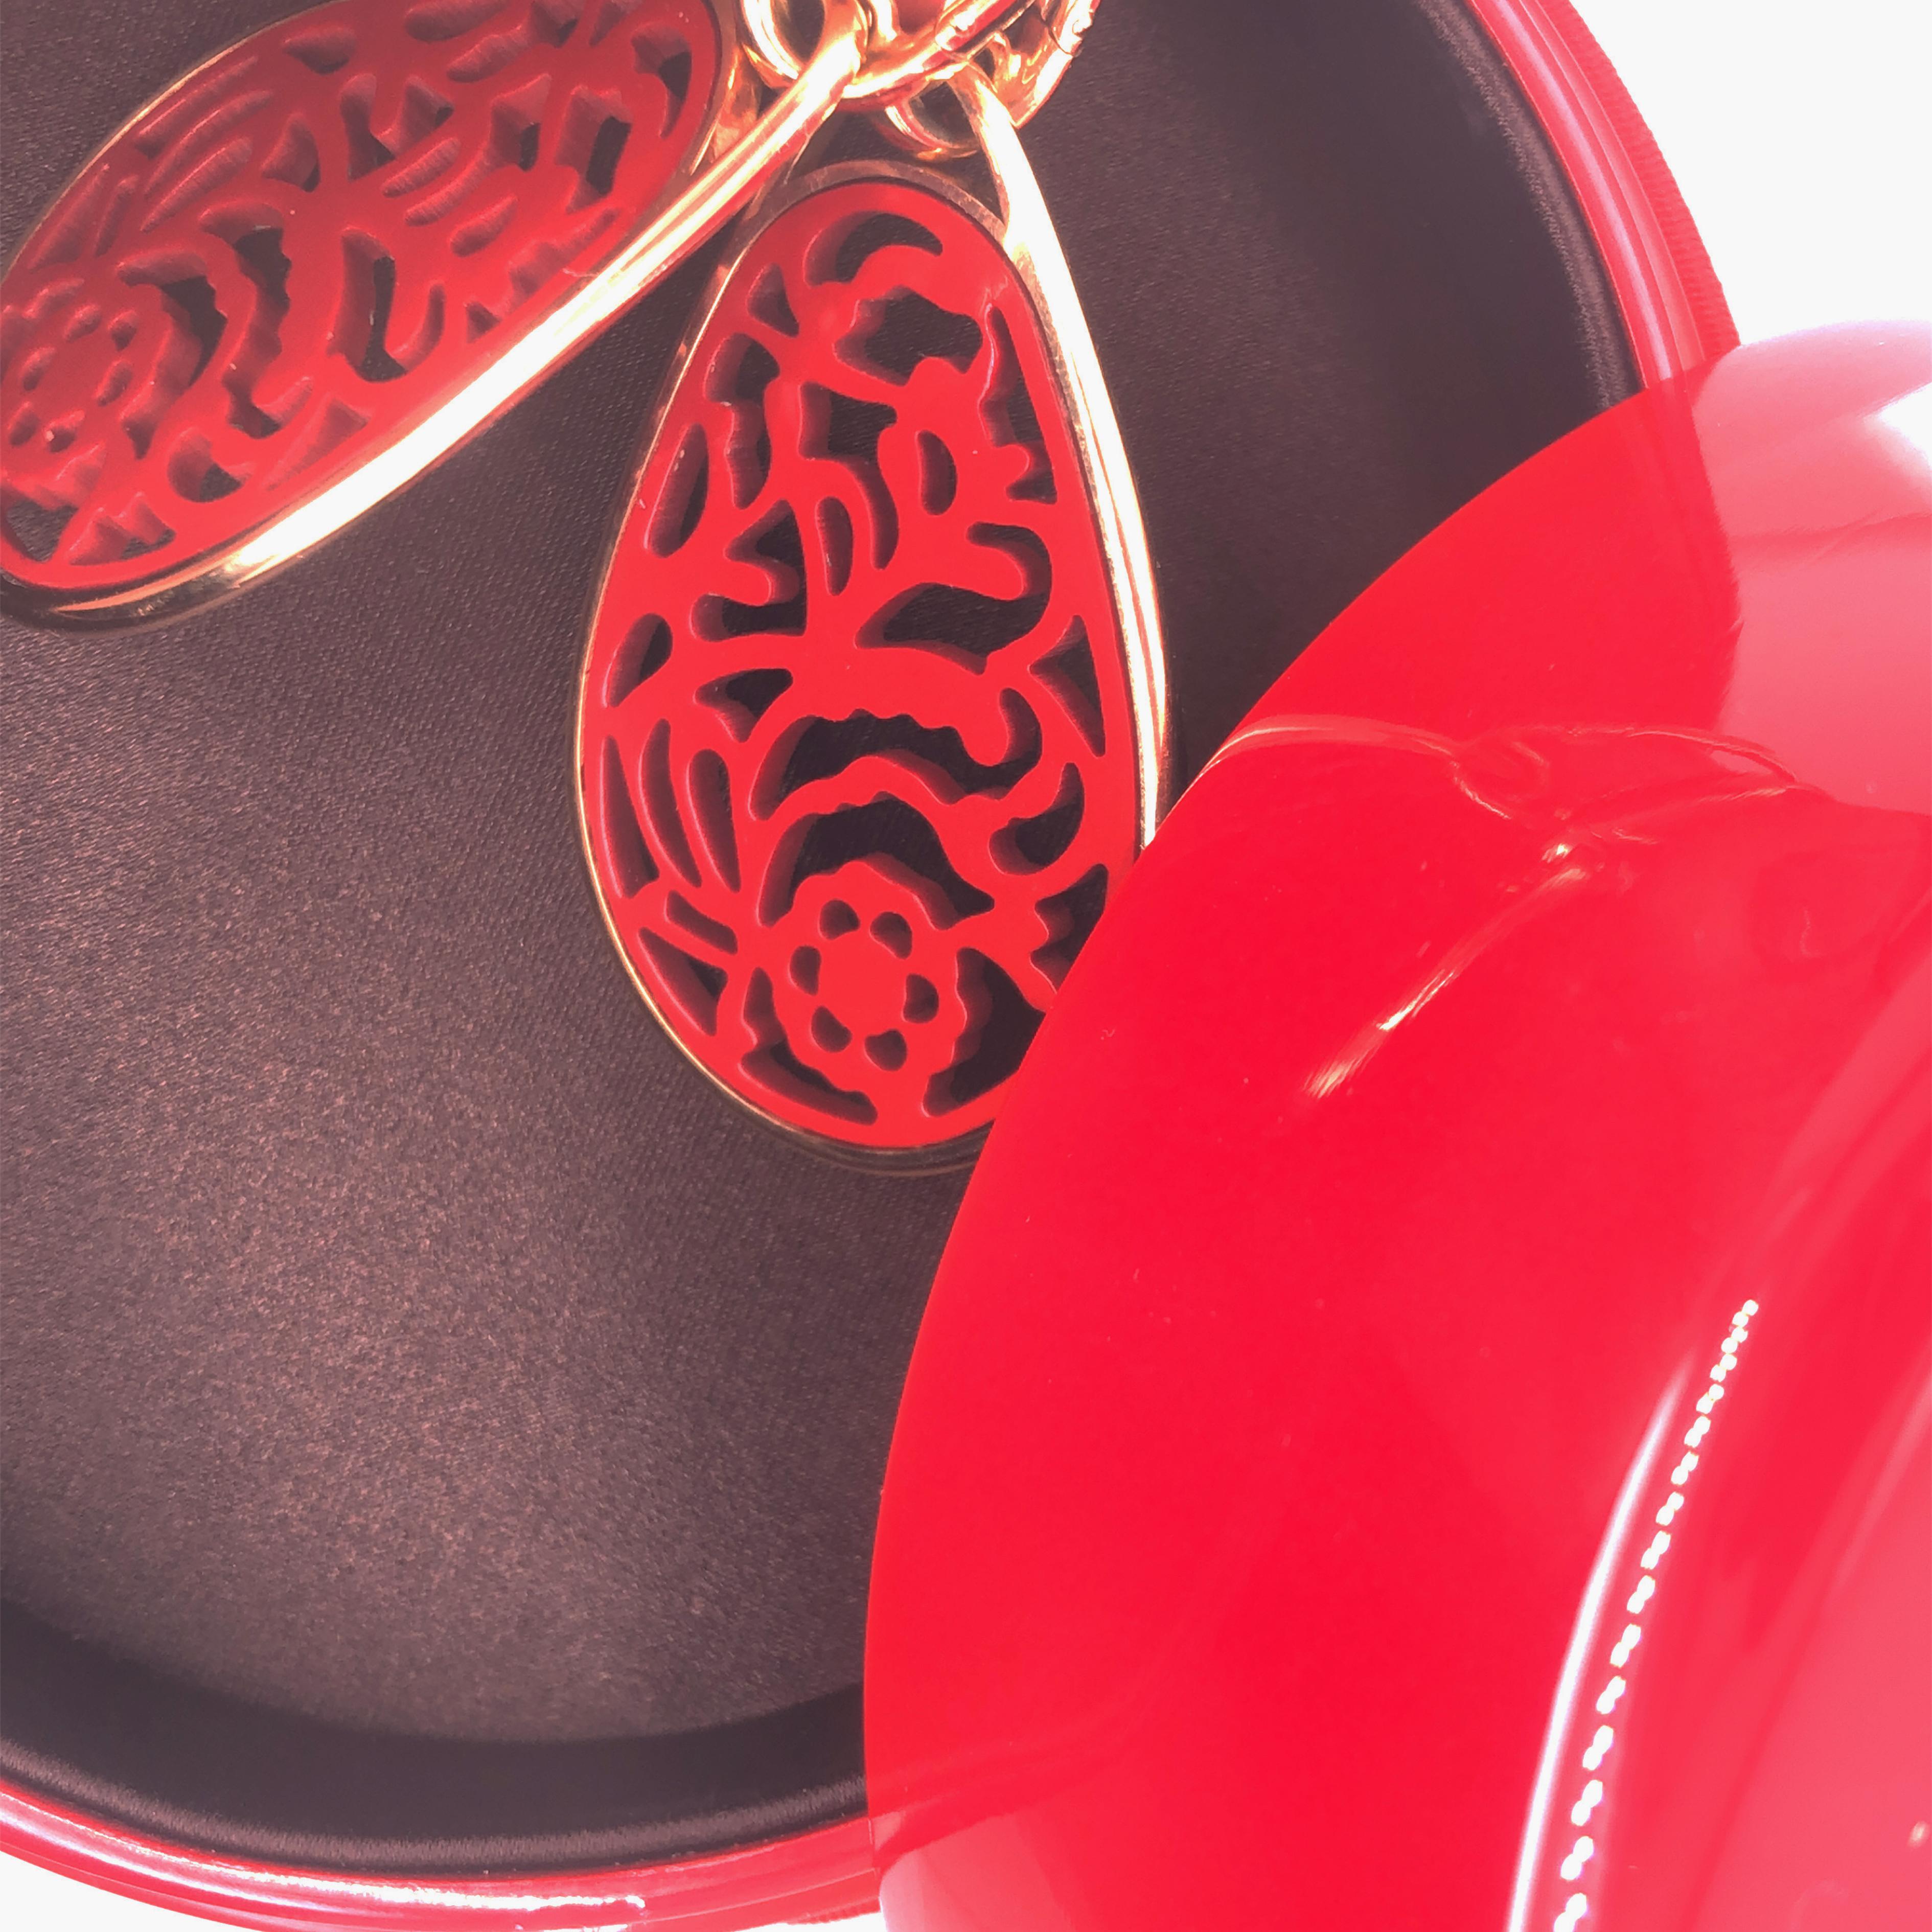 A Pomellato Iconic Timeless Jewel: Lightweight and striking, these Drop Earrings accentuate the delicacy of Rose Gold with an Inlaid Floral Pattern in Lacquer Red. Rhodoid is a special type of cellulose acetate, a natural compound obtained by